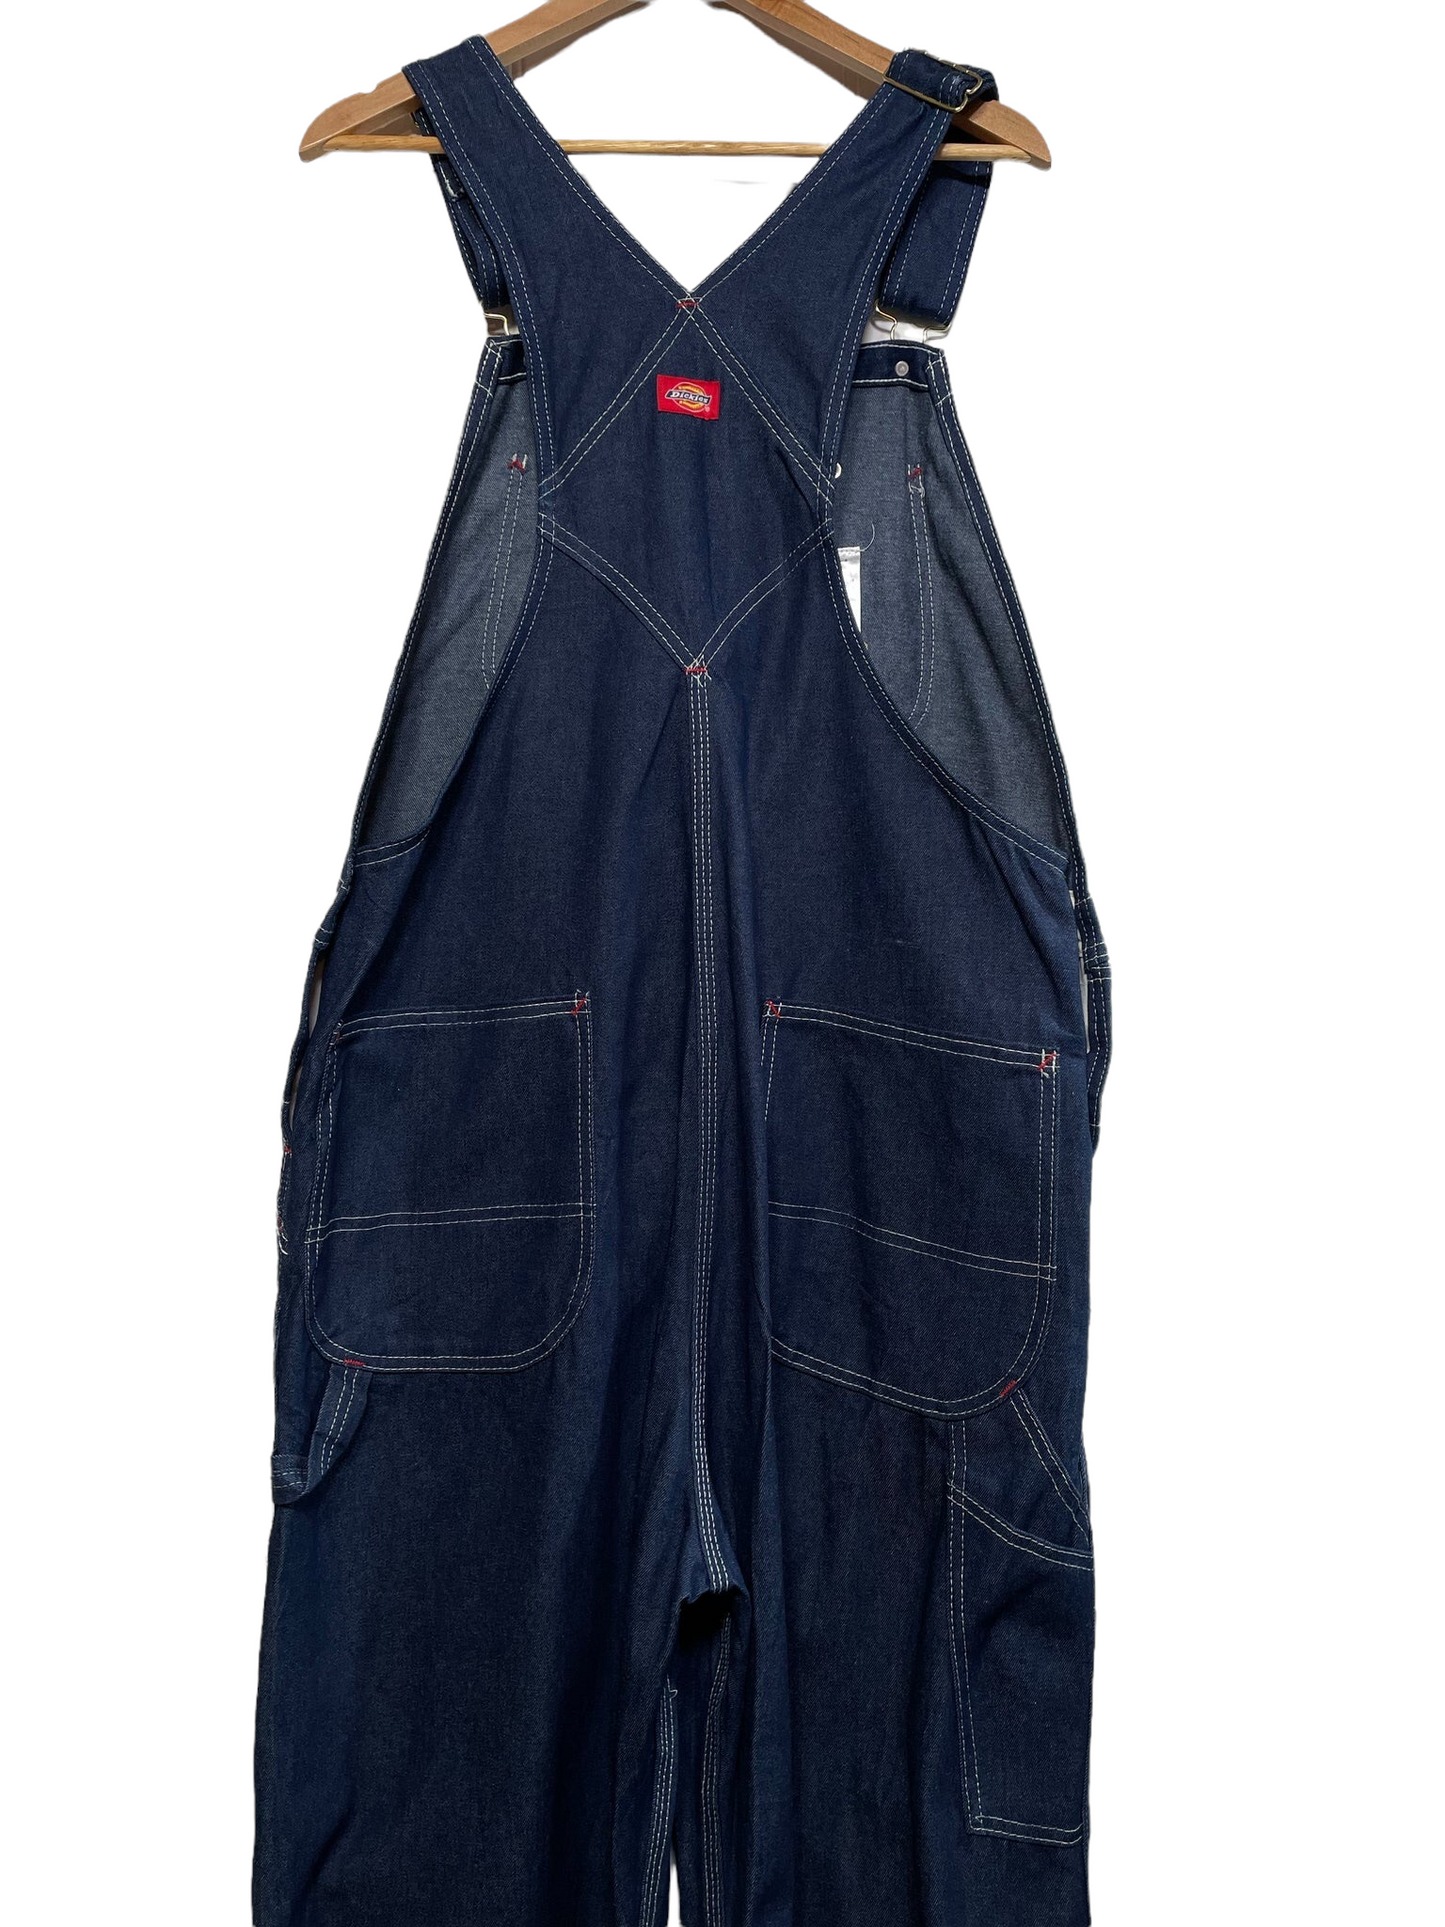 Dickies Dungarees with Contrast Stitching (Size 38X30)